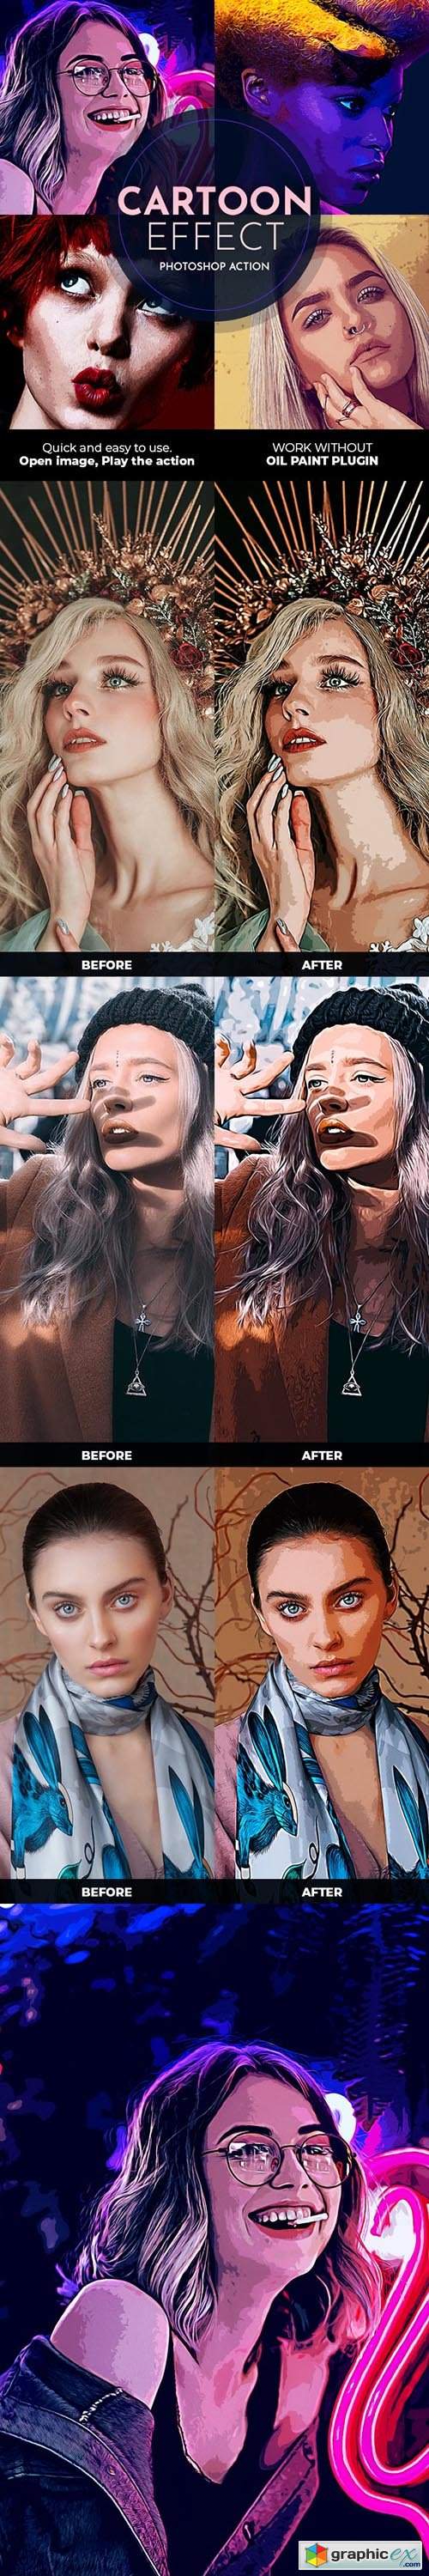 Cartoon Effect Photoshop Action 28468594 » Free Download Vector Stock